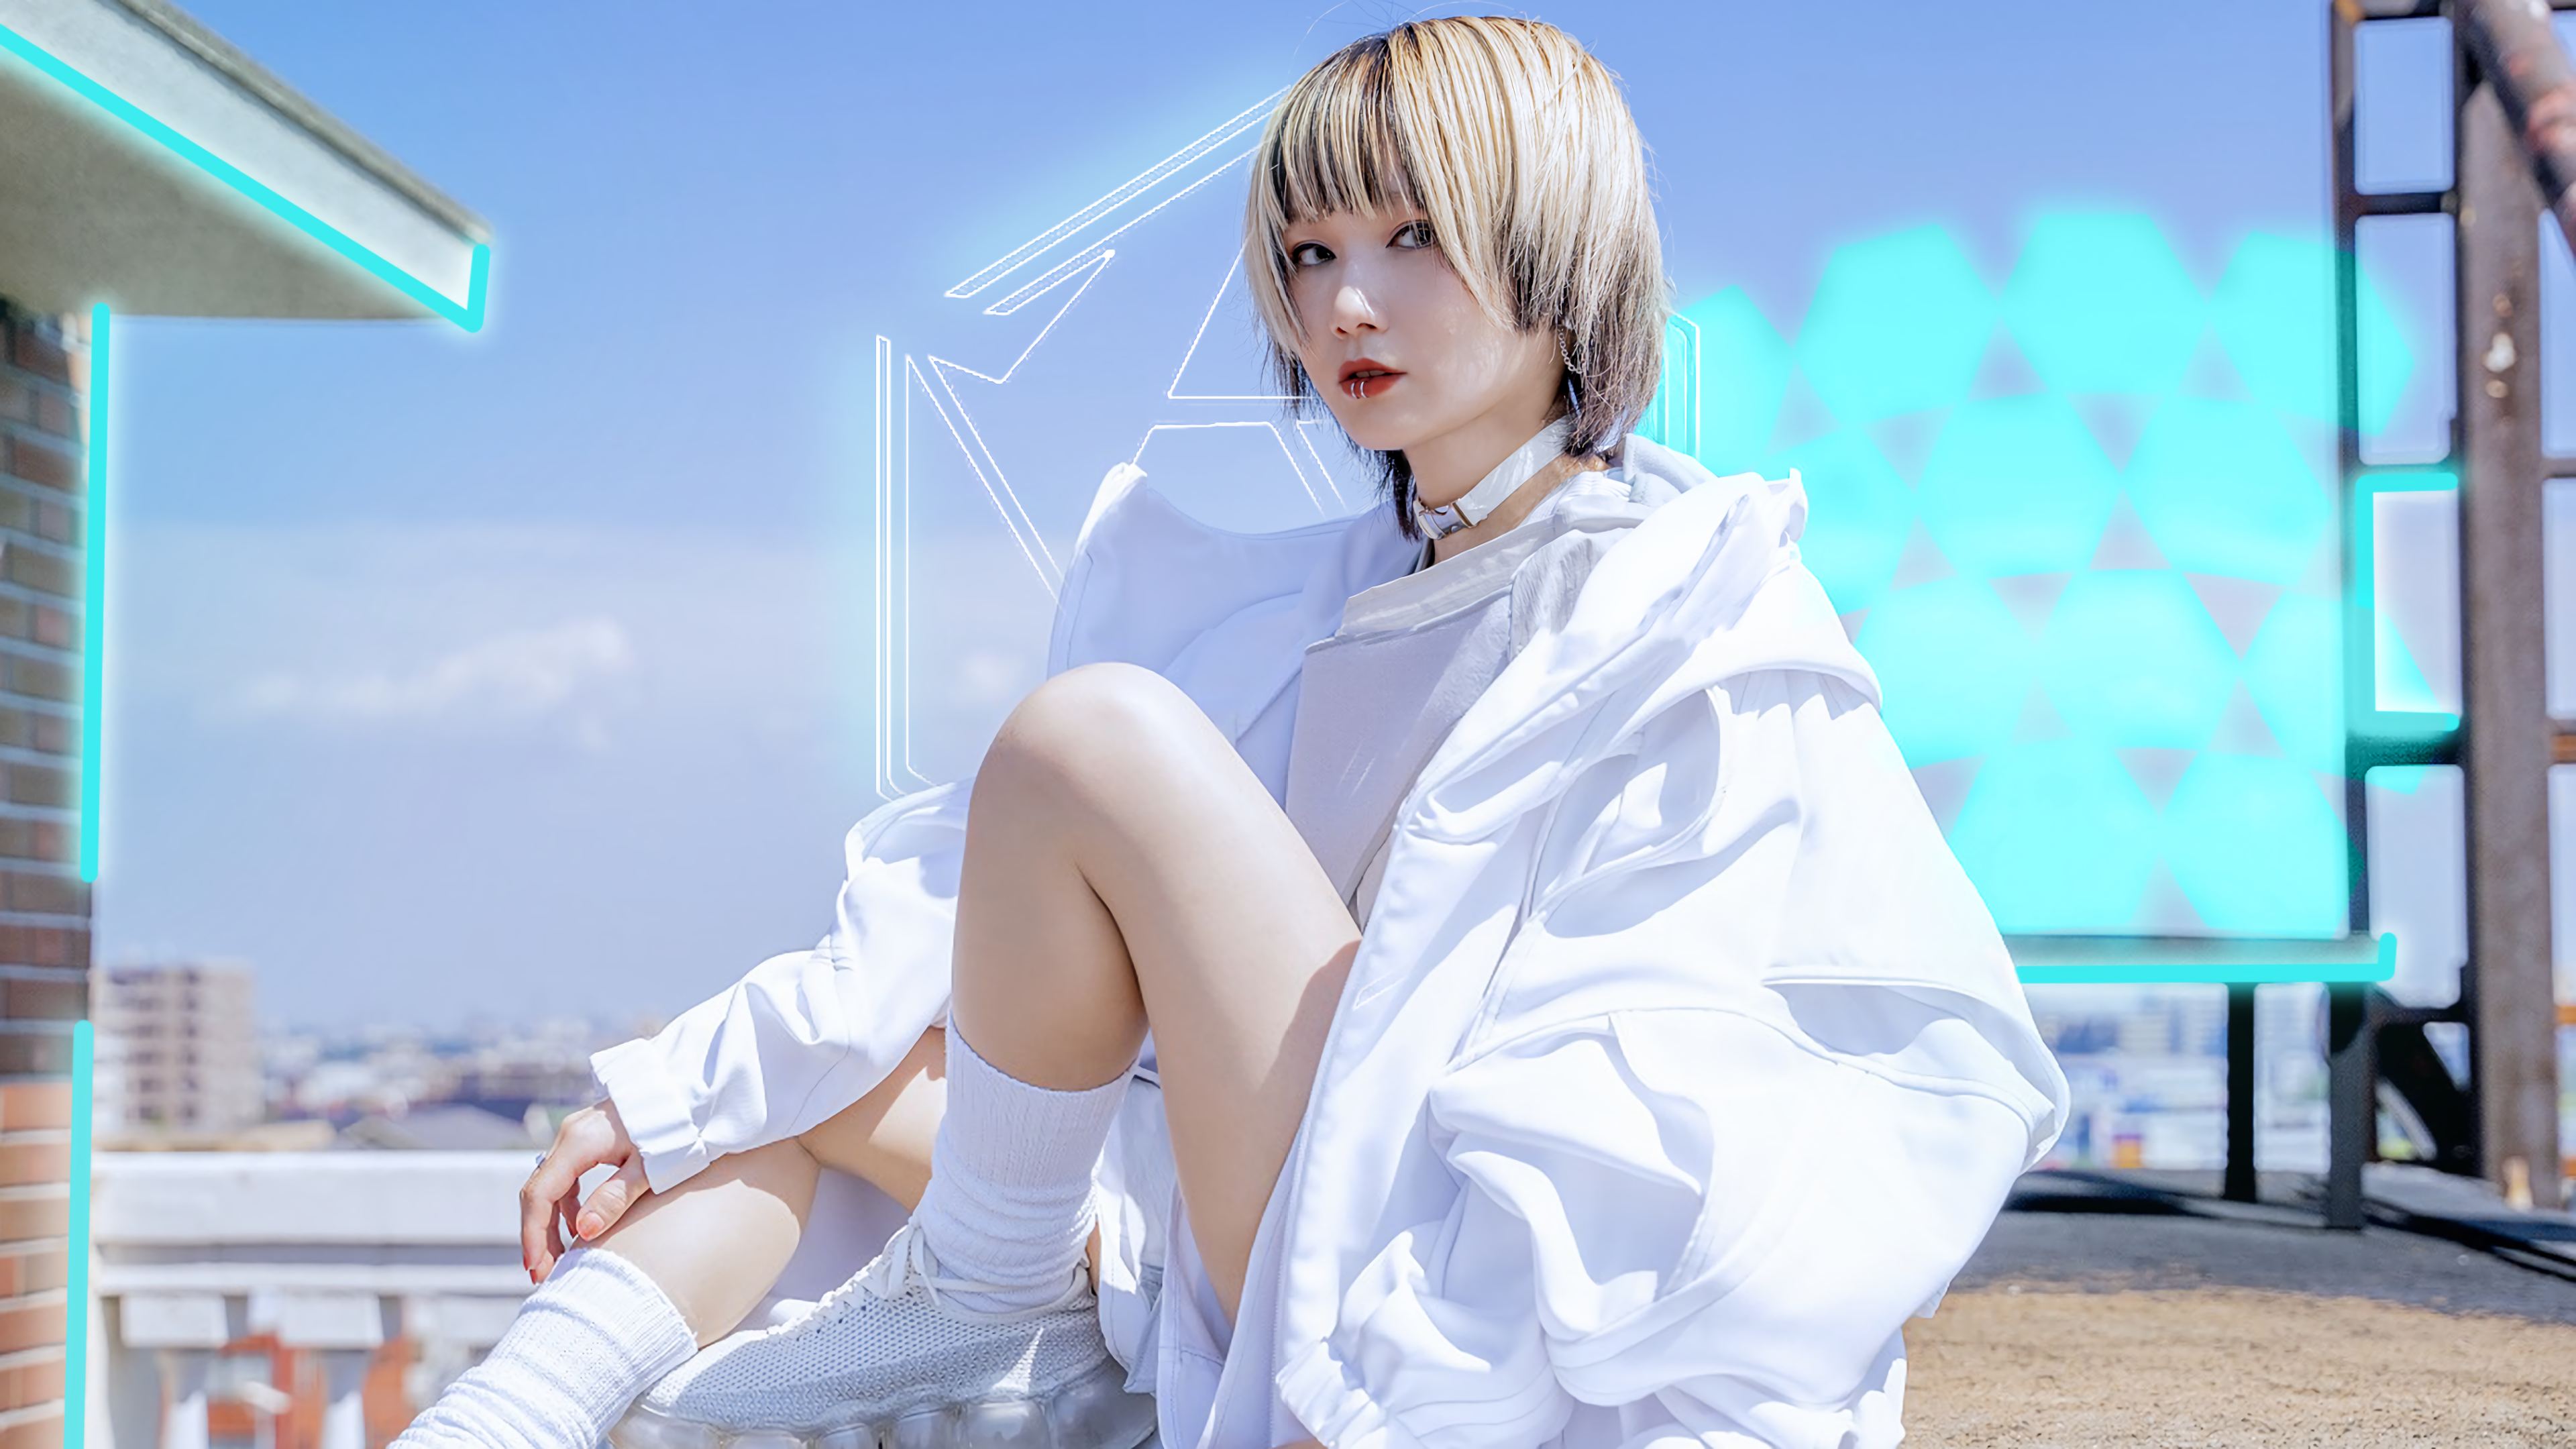 Beautiful Reol wallpaper for all of you (made by me)